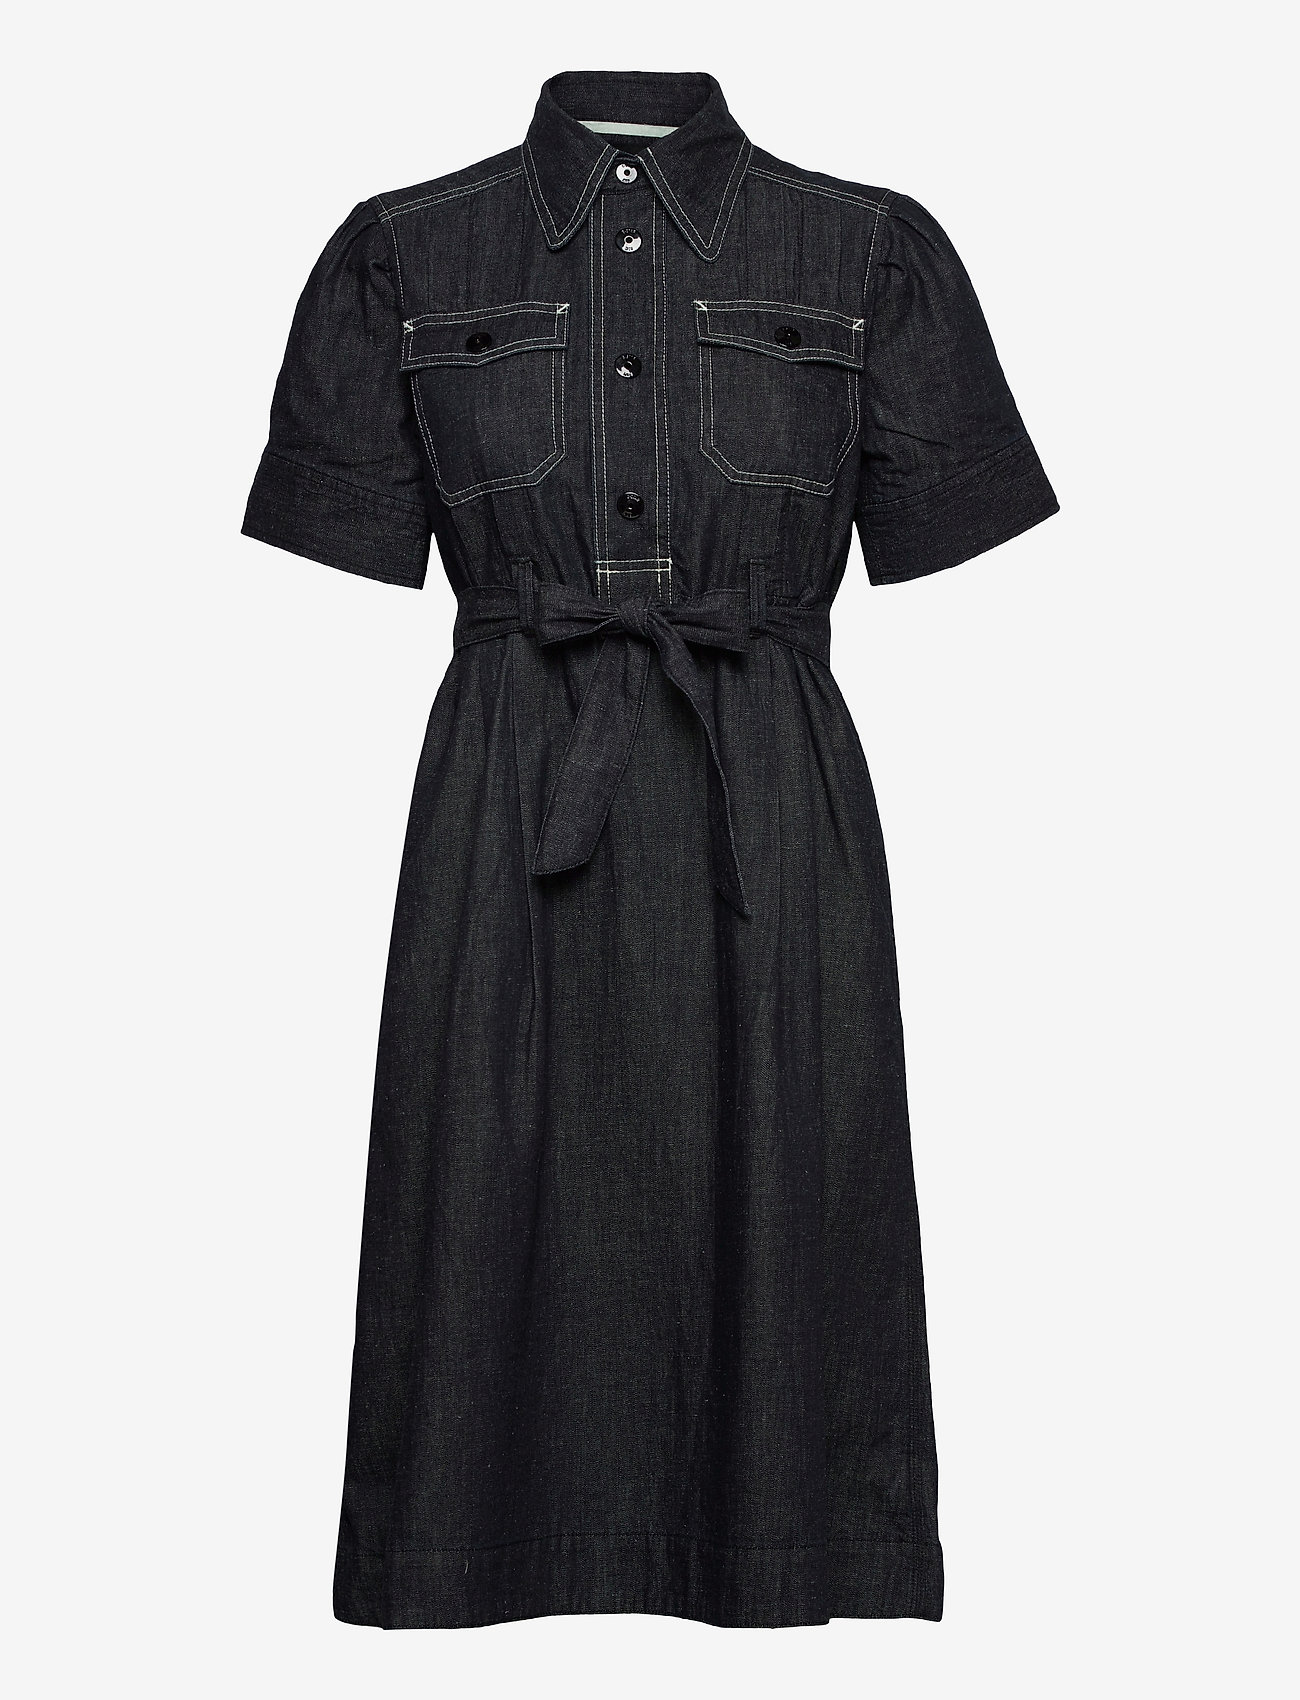 G-Star RAW - Scouting dress s\s - summer dresses - rinsed - 0